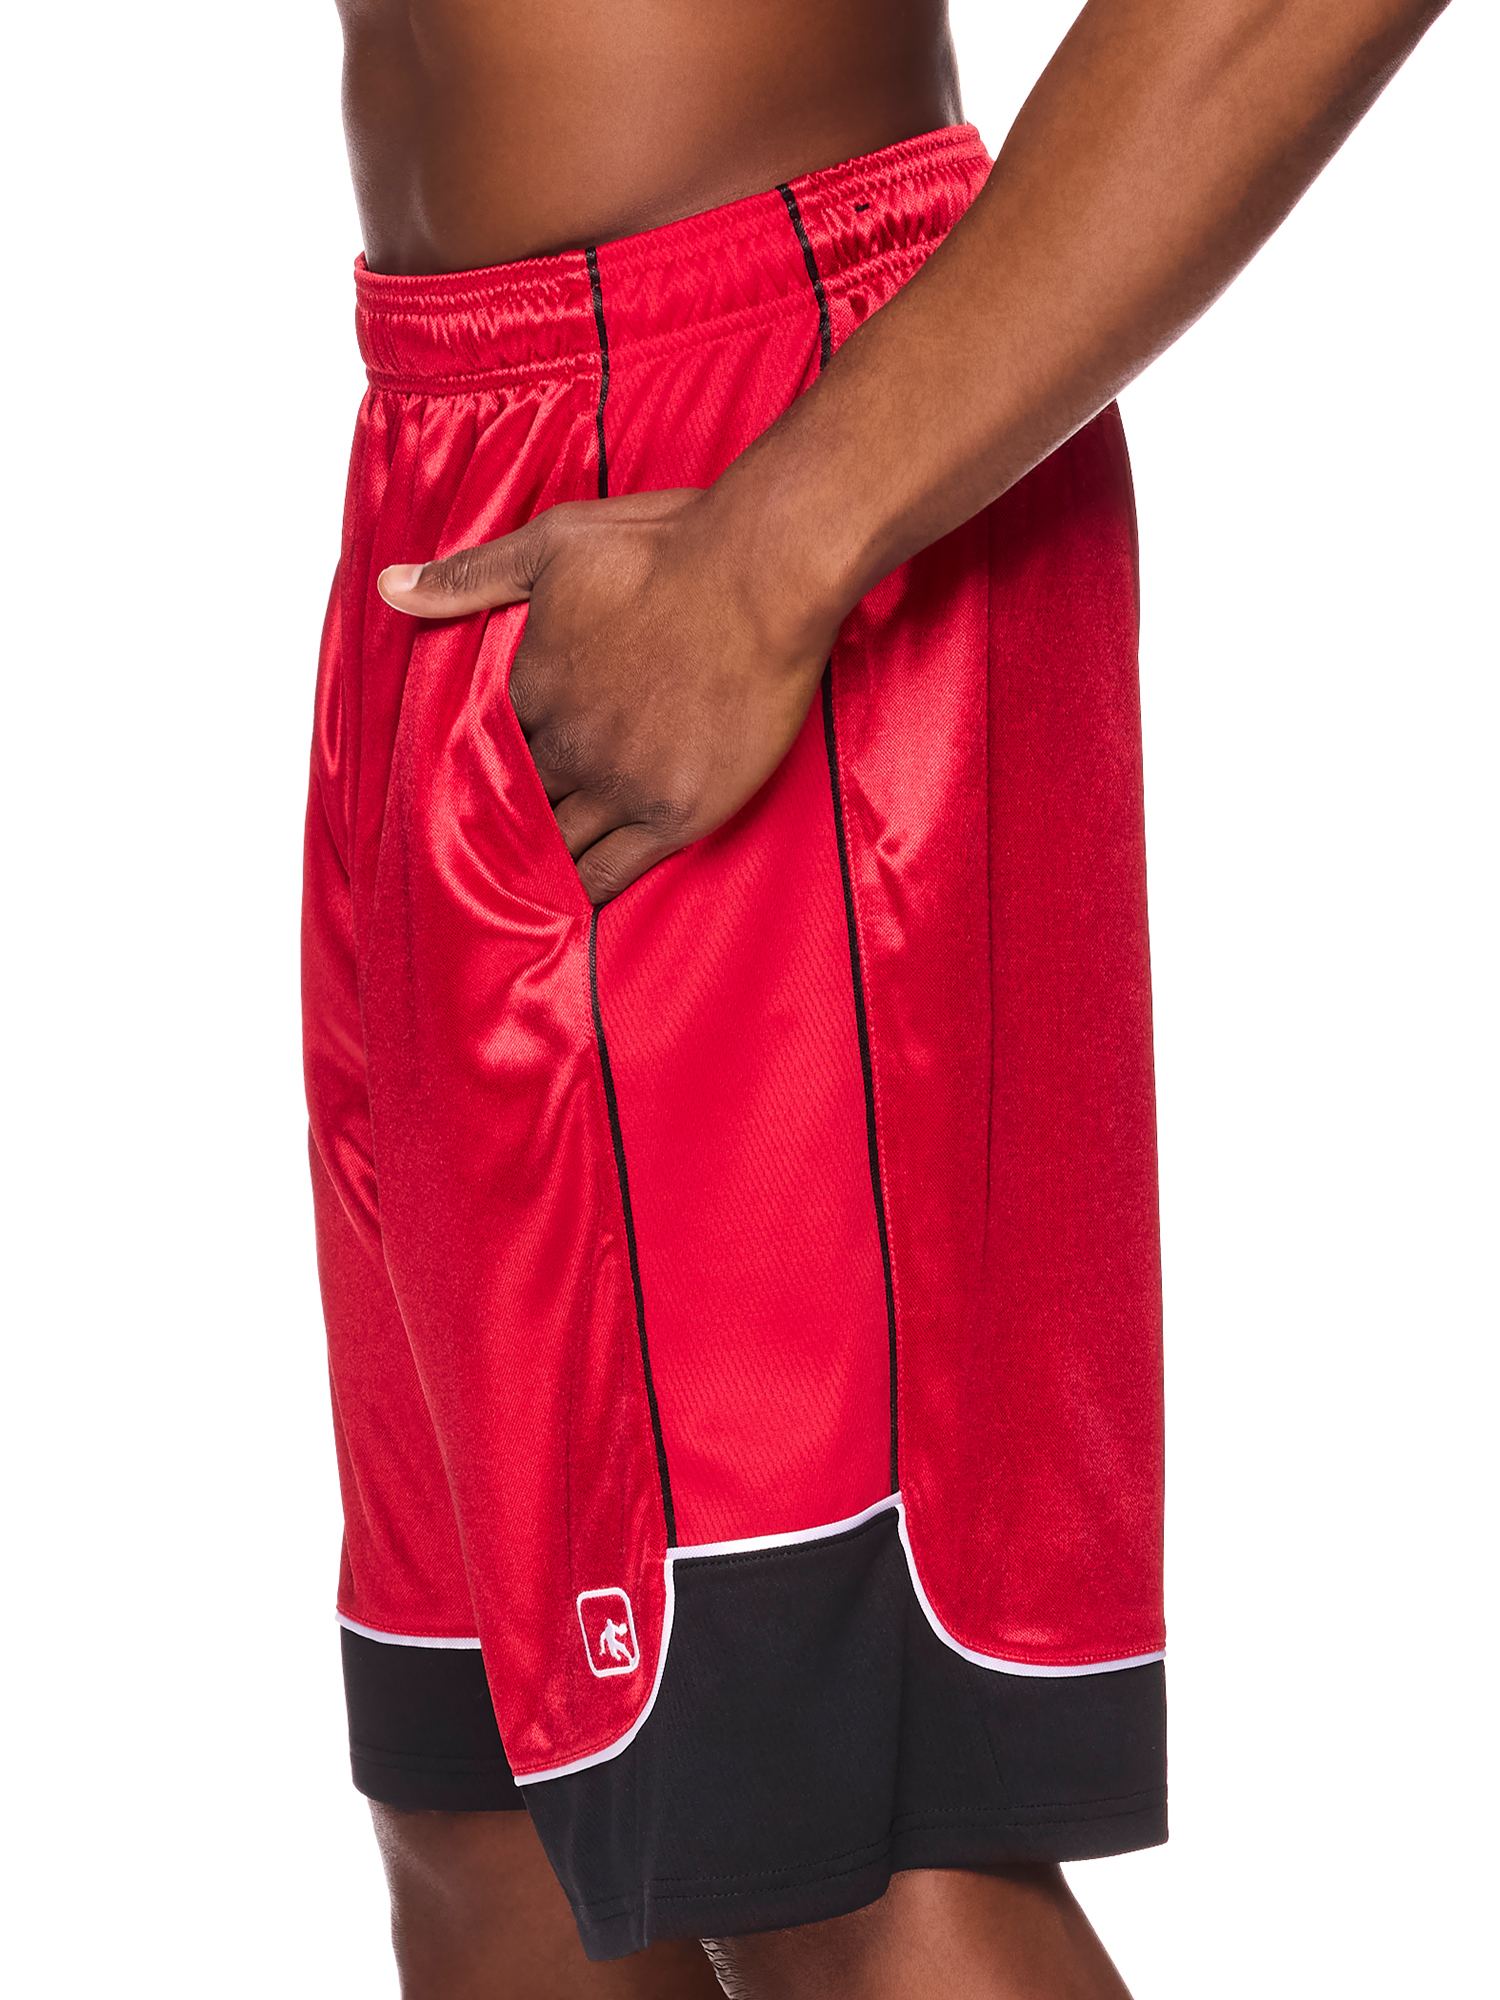 AND1 Men and Big Men's All Court Colorblock 11" Shorts, up to Size 3XL - image 4 of 5